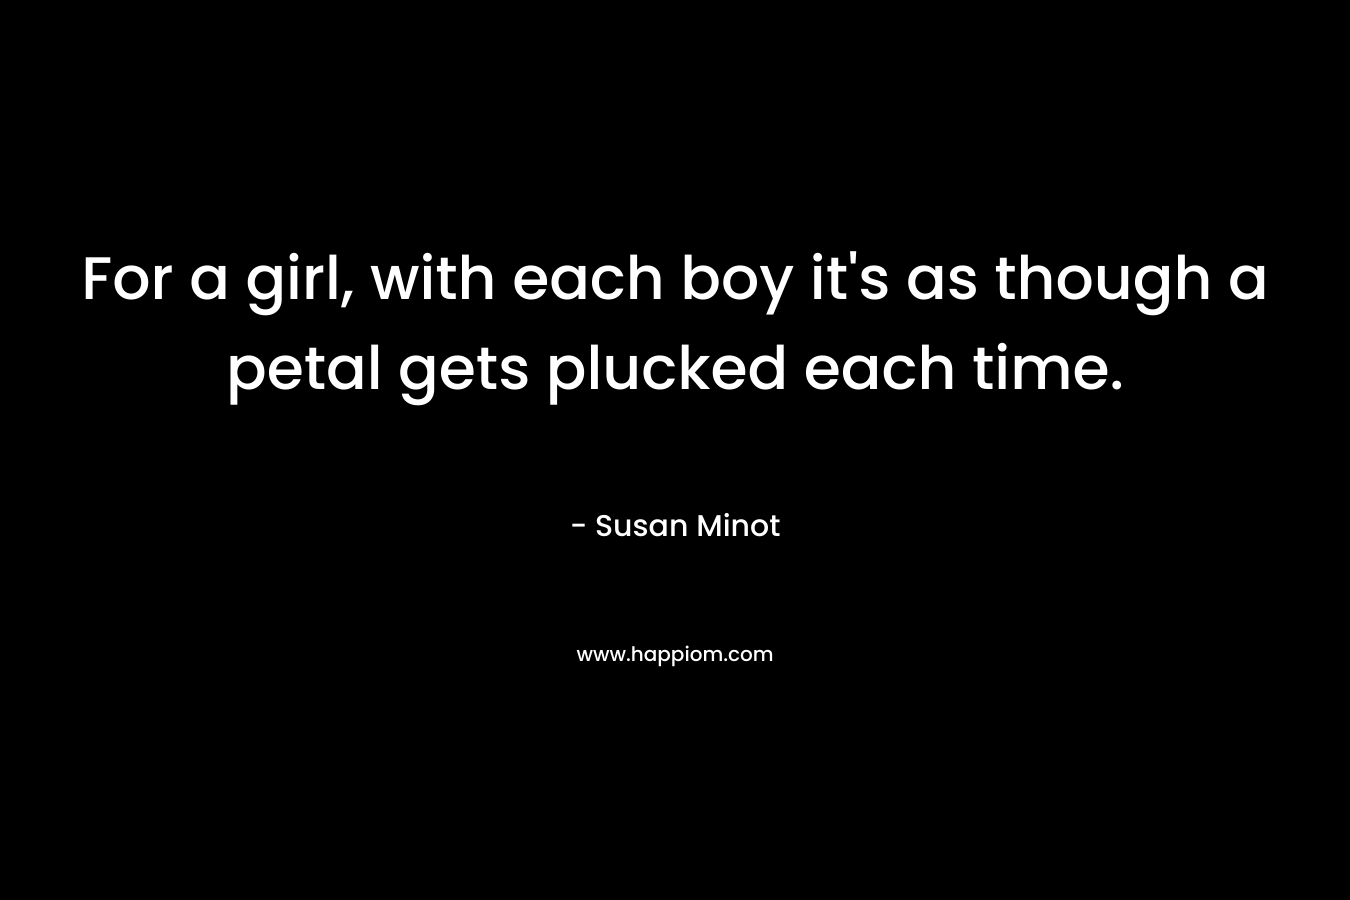 For a girl, with each boy it’s as though a petal gets plucked each time. – Susan Minot